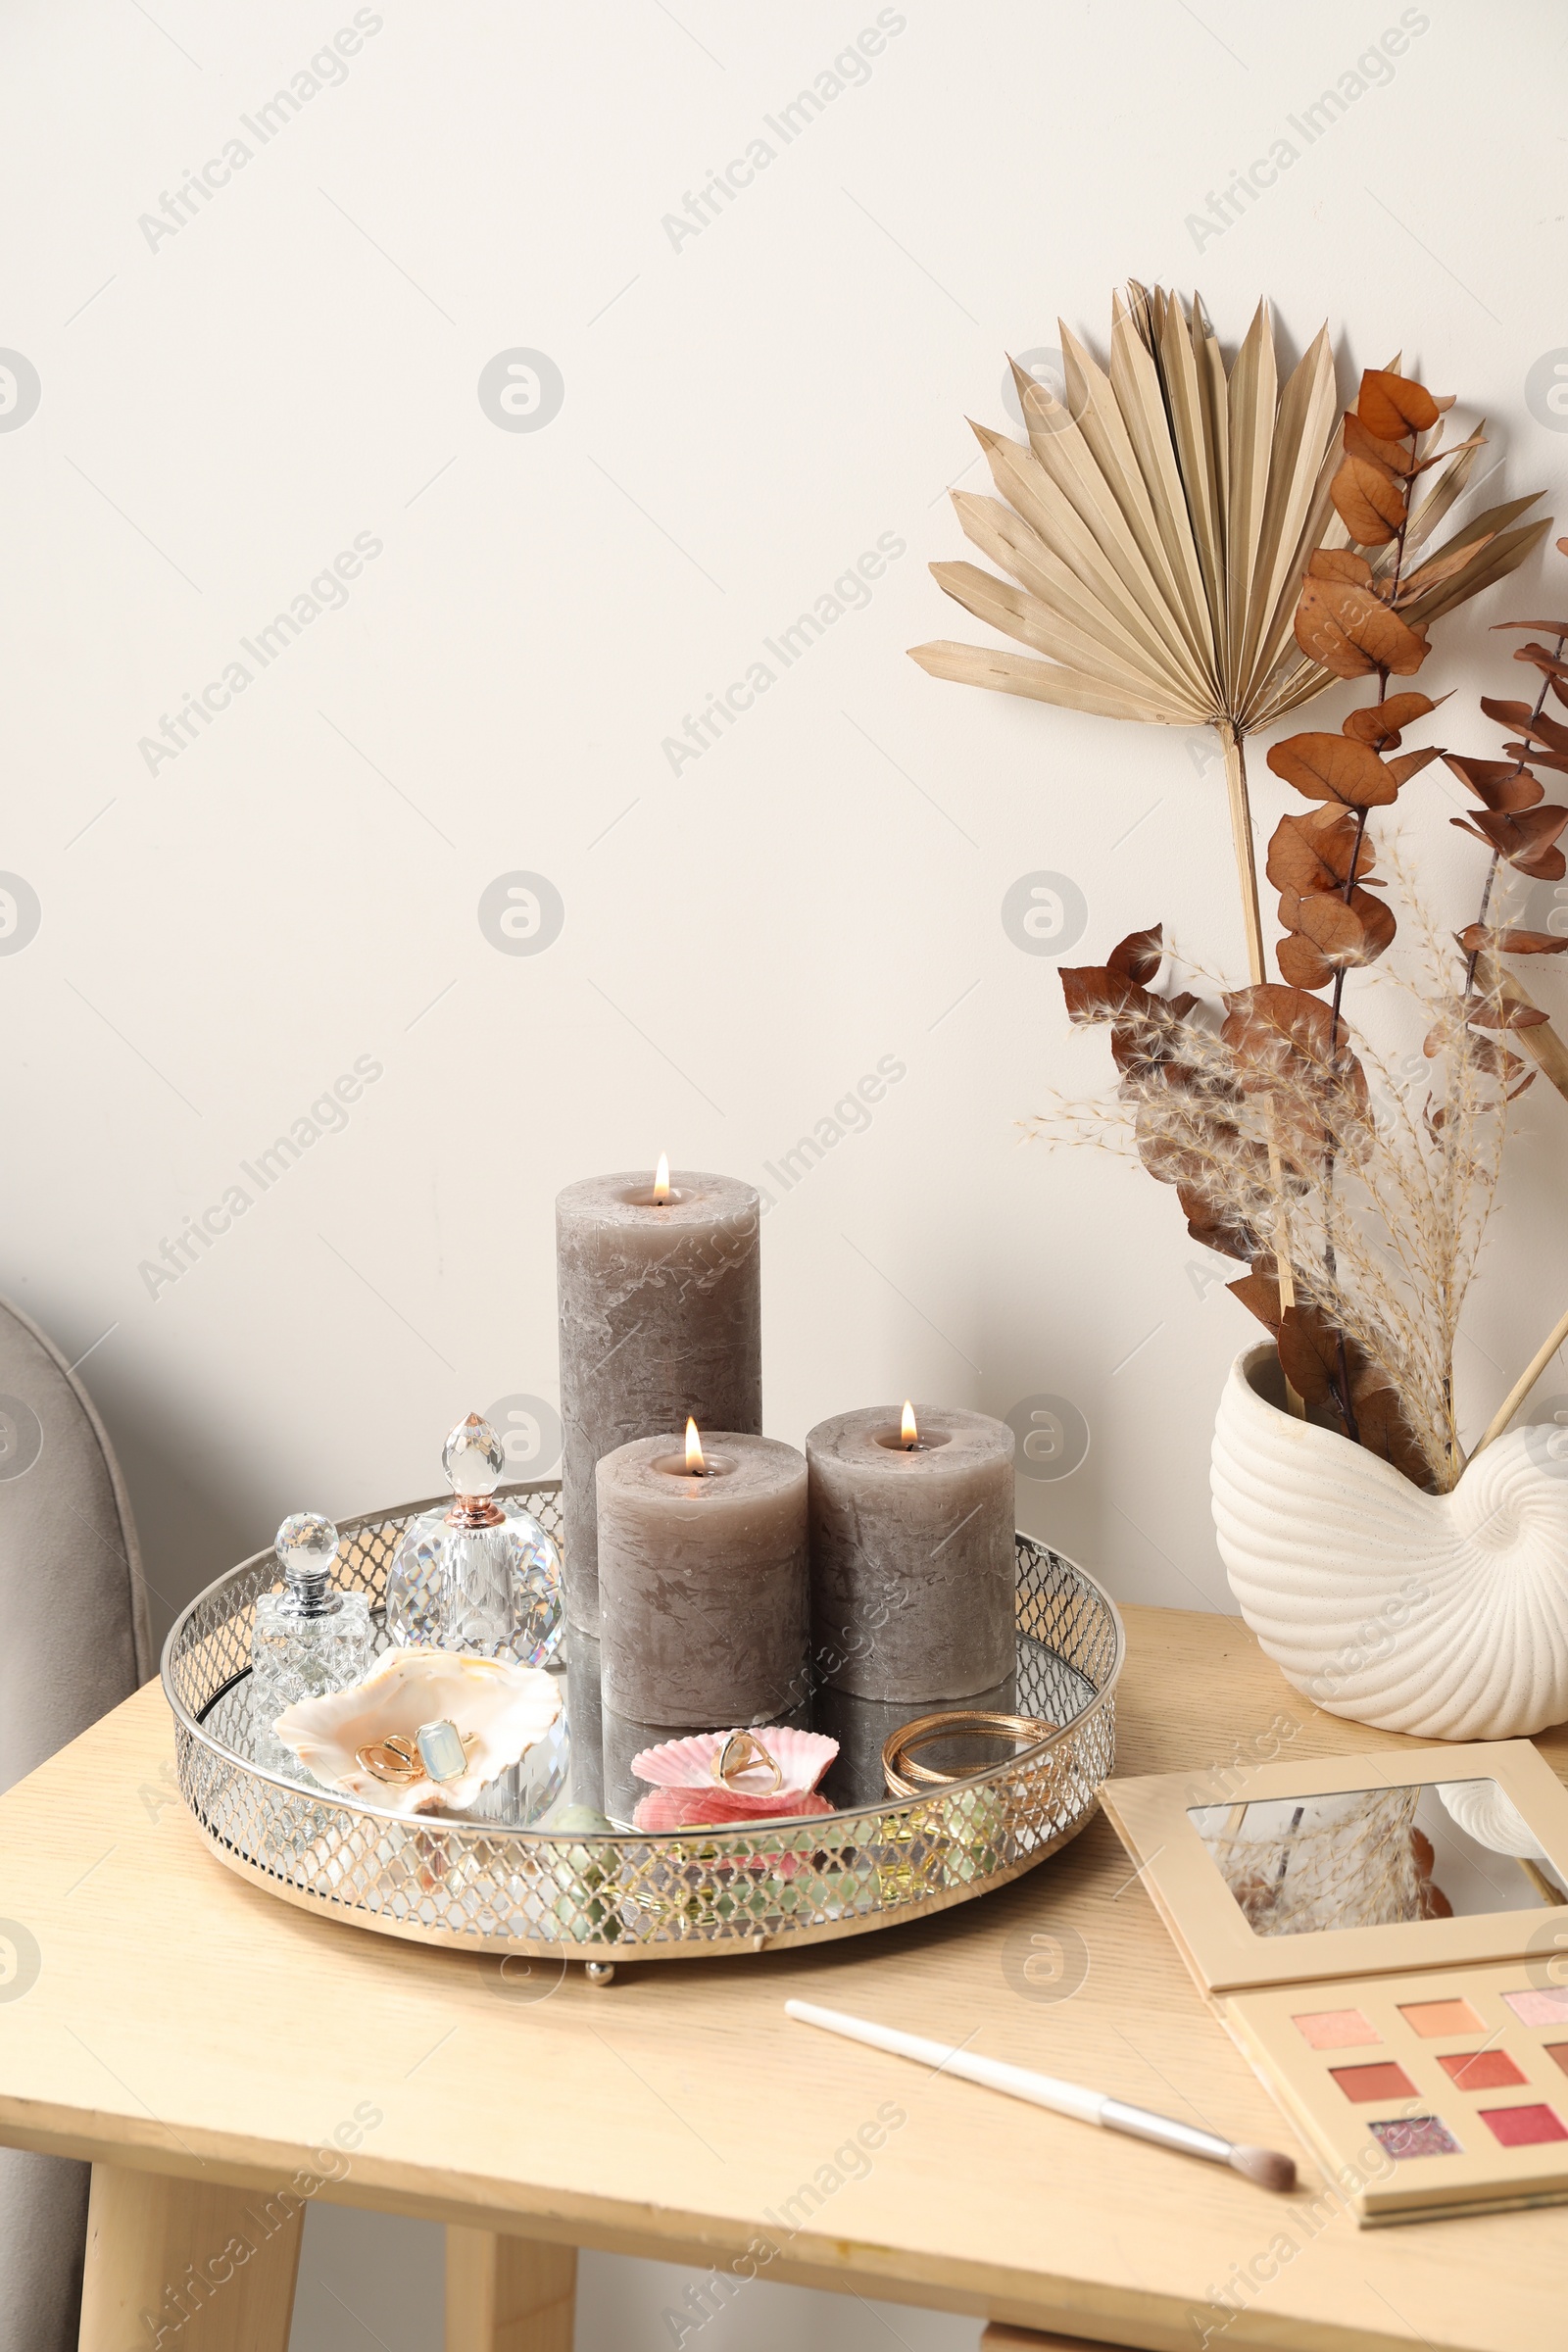 Photo of Dressing table with makeup products, accessories and decor in room